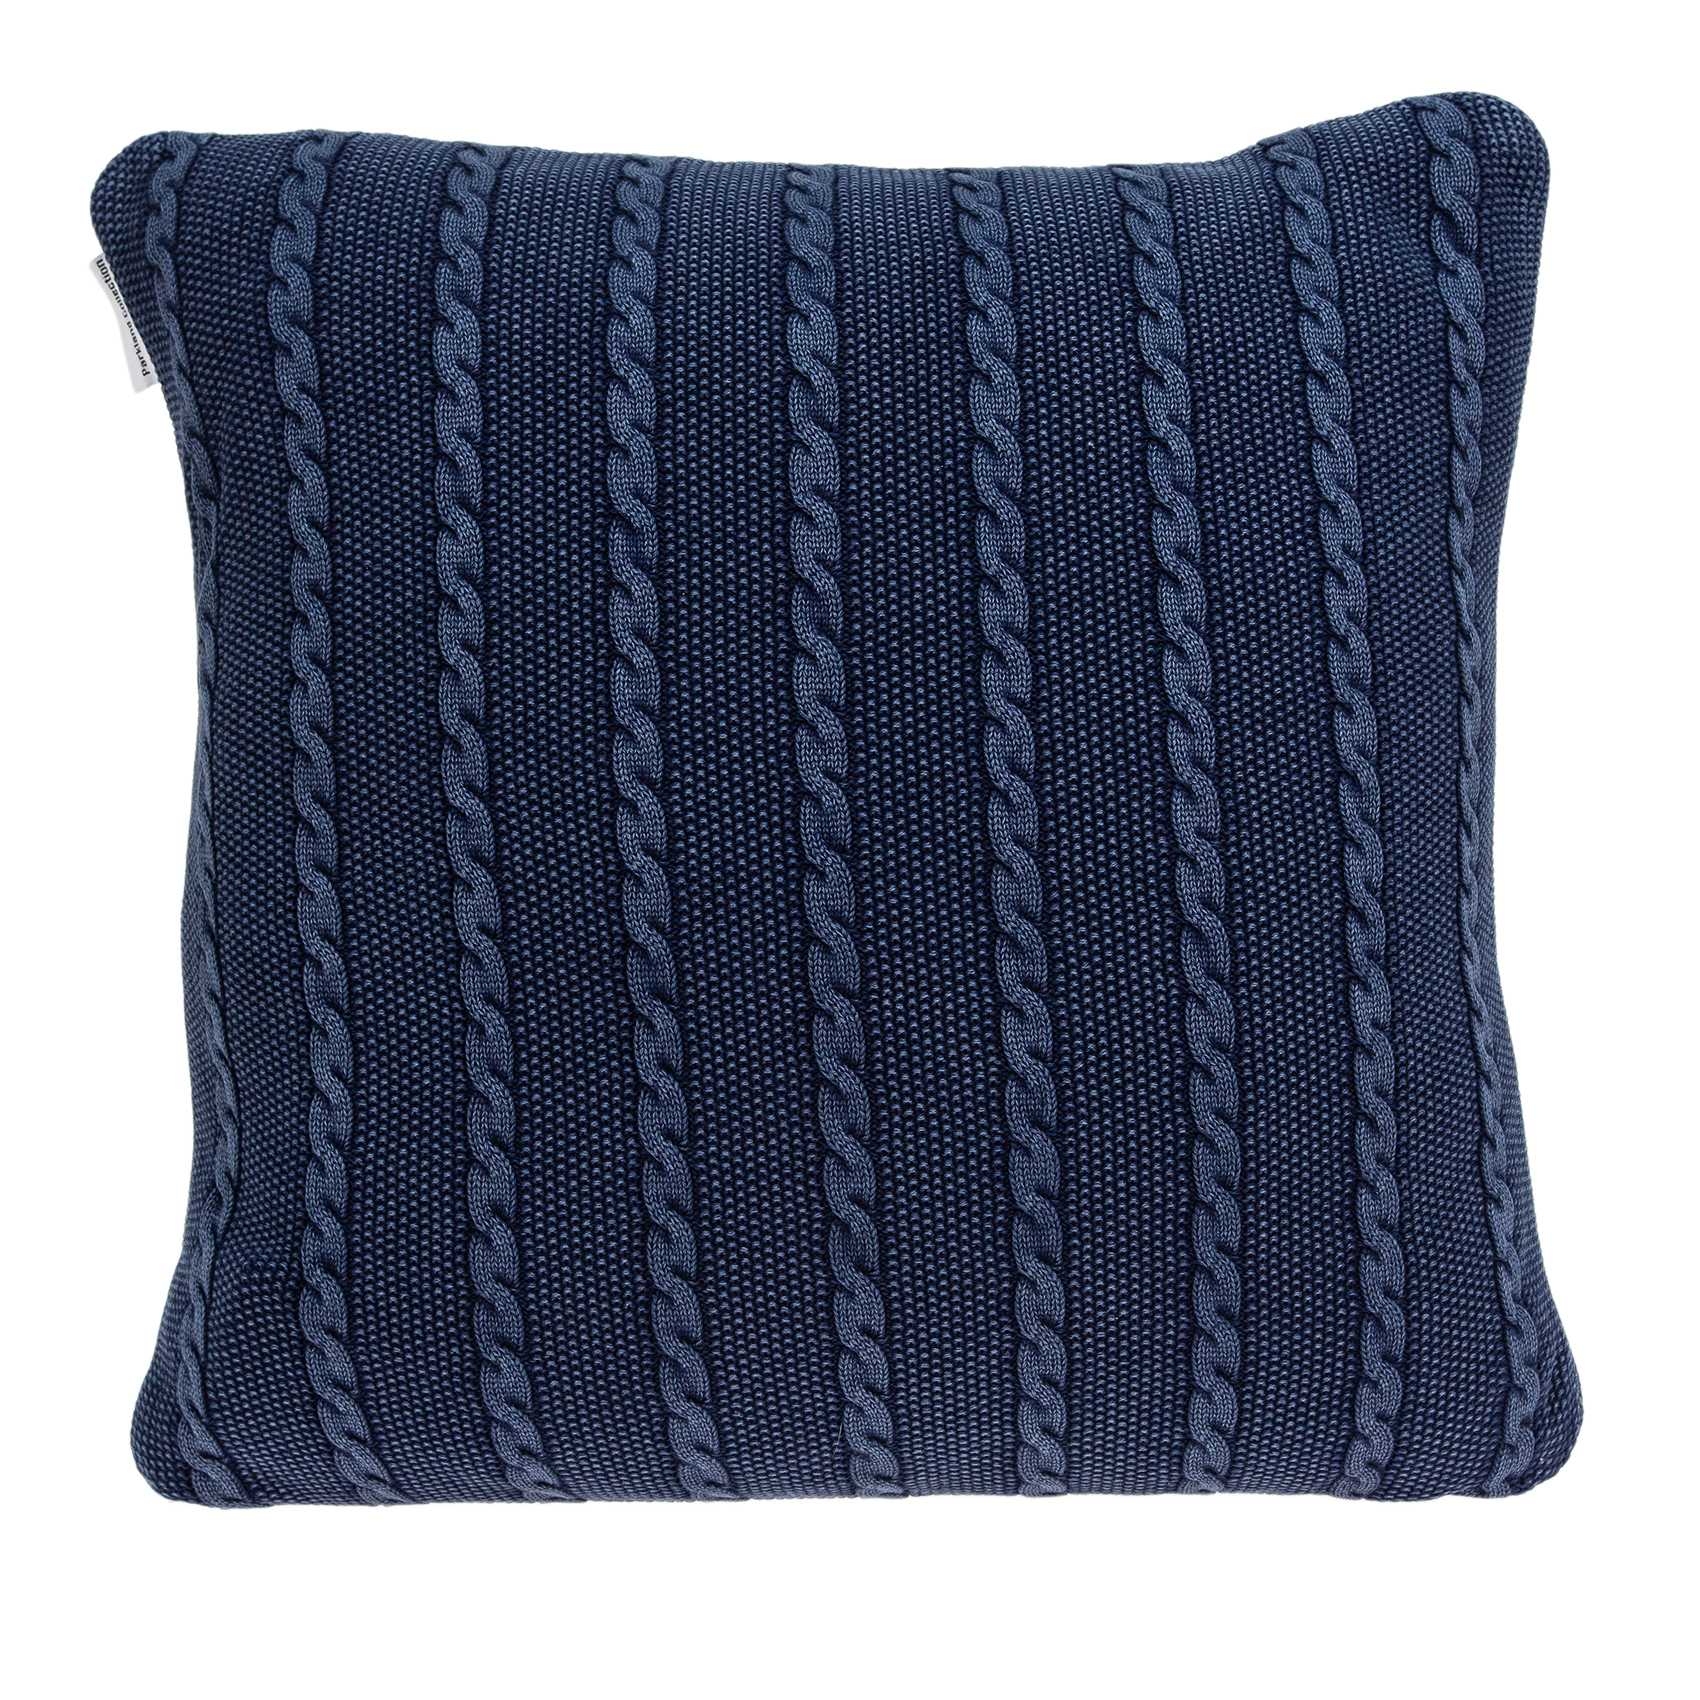 18" x 0.5" x 18" Transitional Blue Pillow Cover